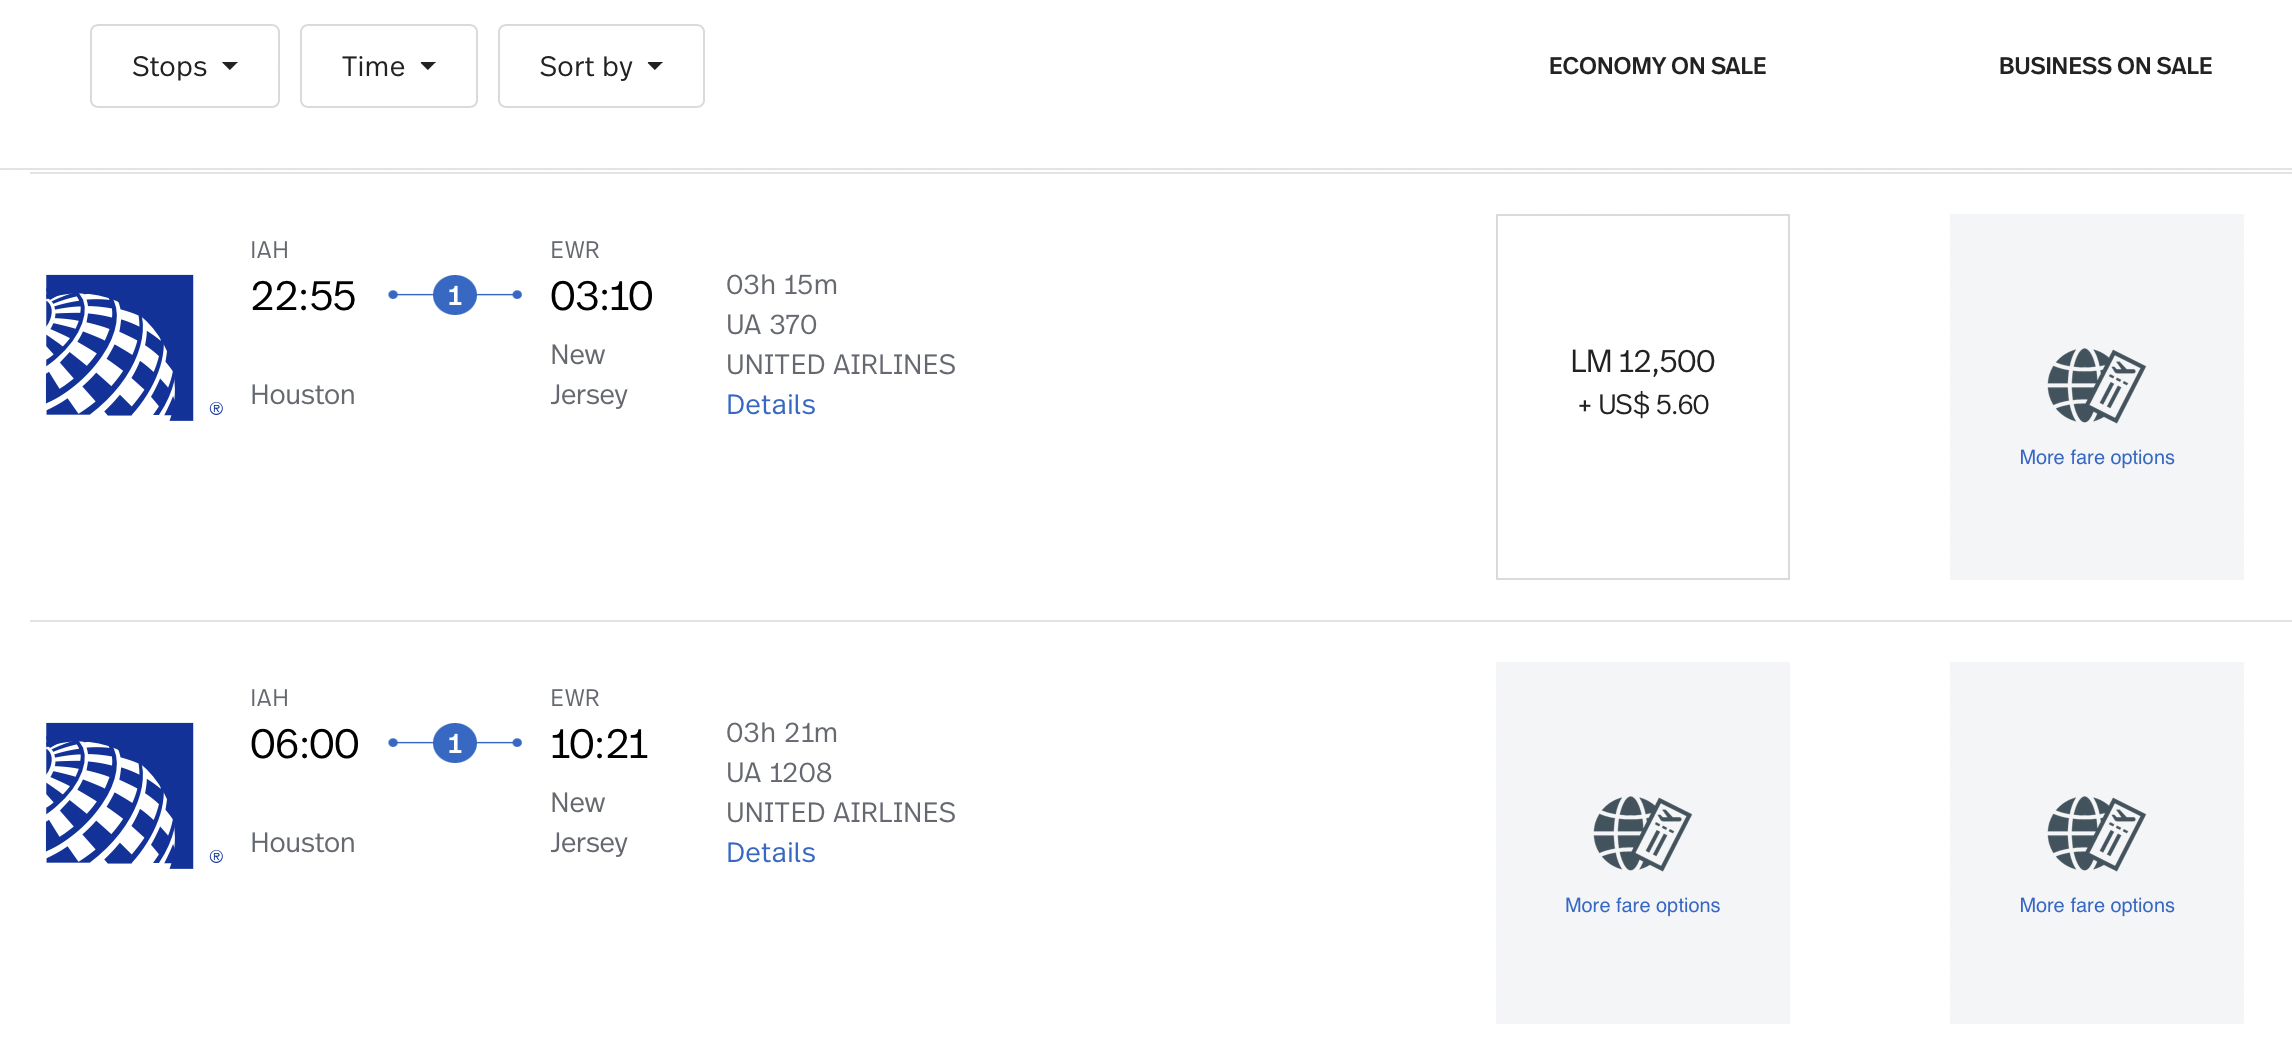 lifemiles united dynamic pricing